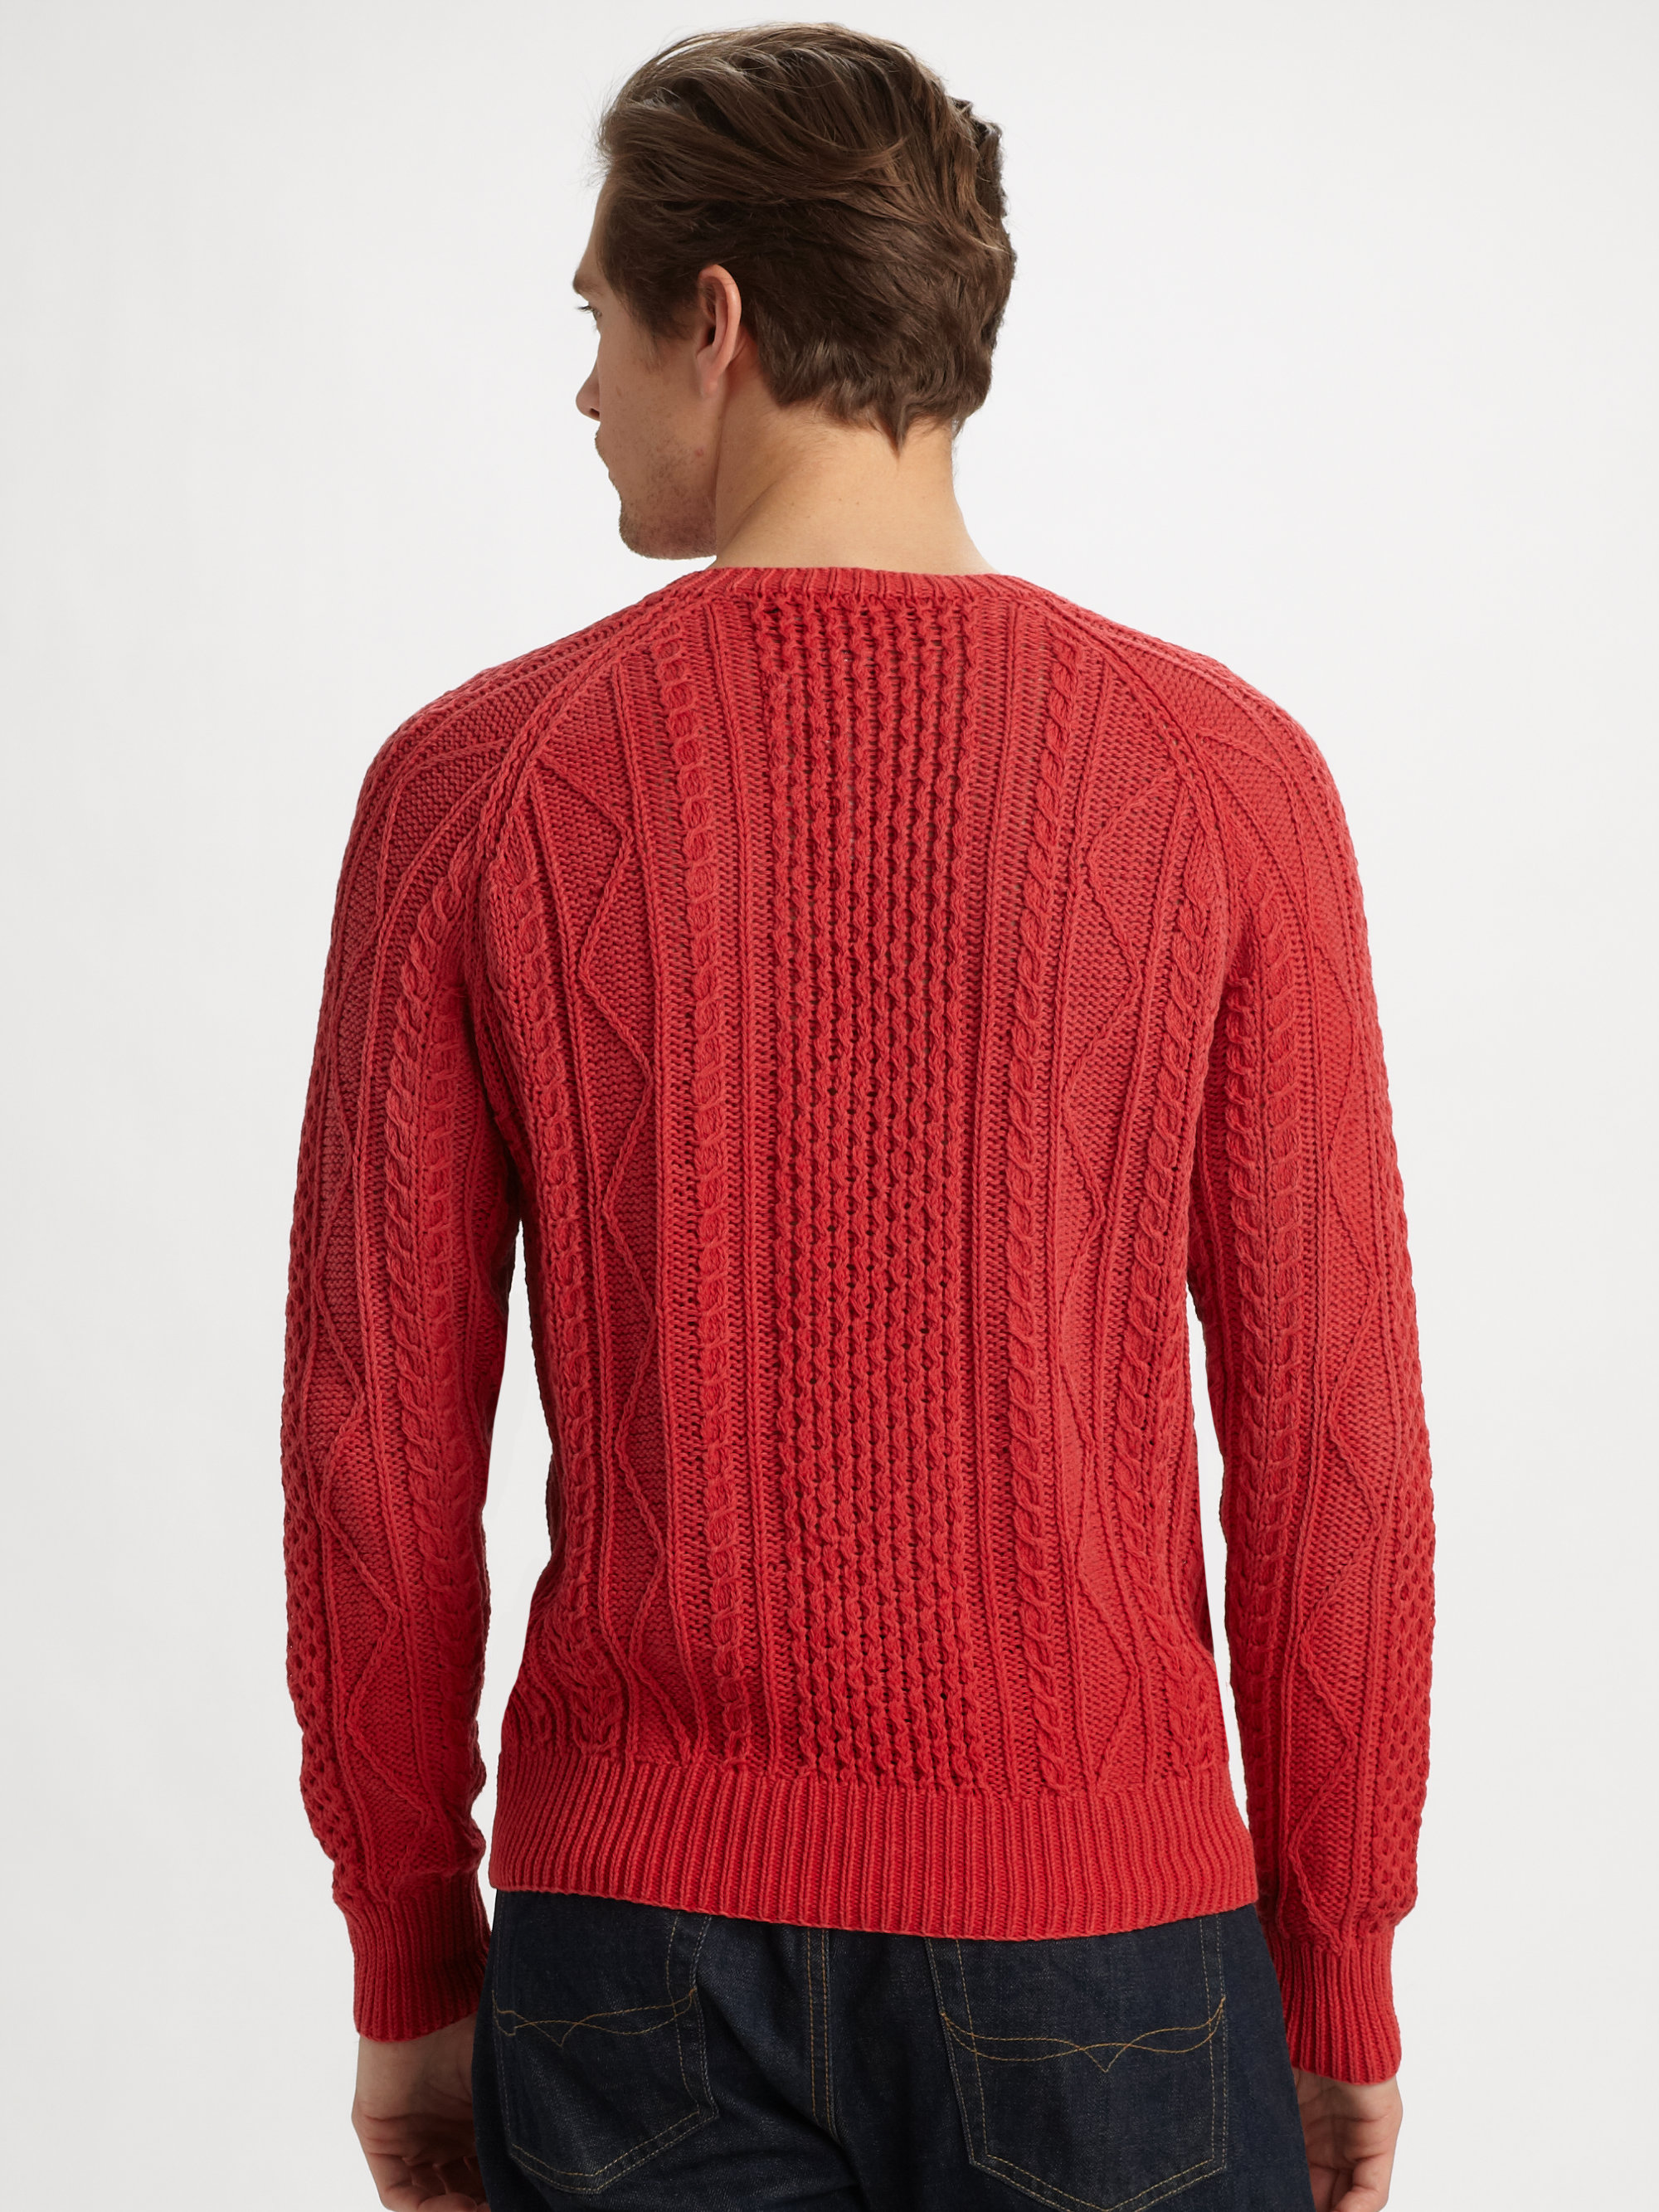 Lyst - Polo Ralph Lauren Crewneck Cotton Sweater in Red for Men